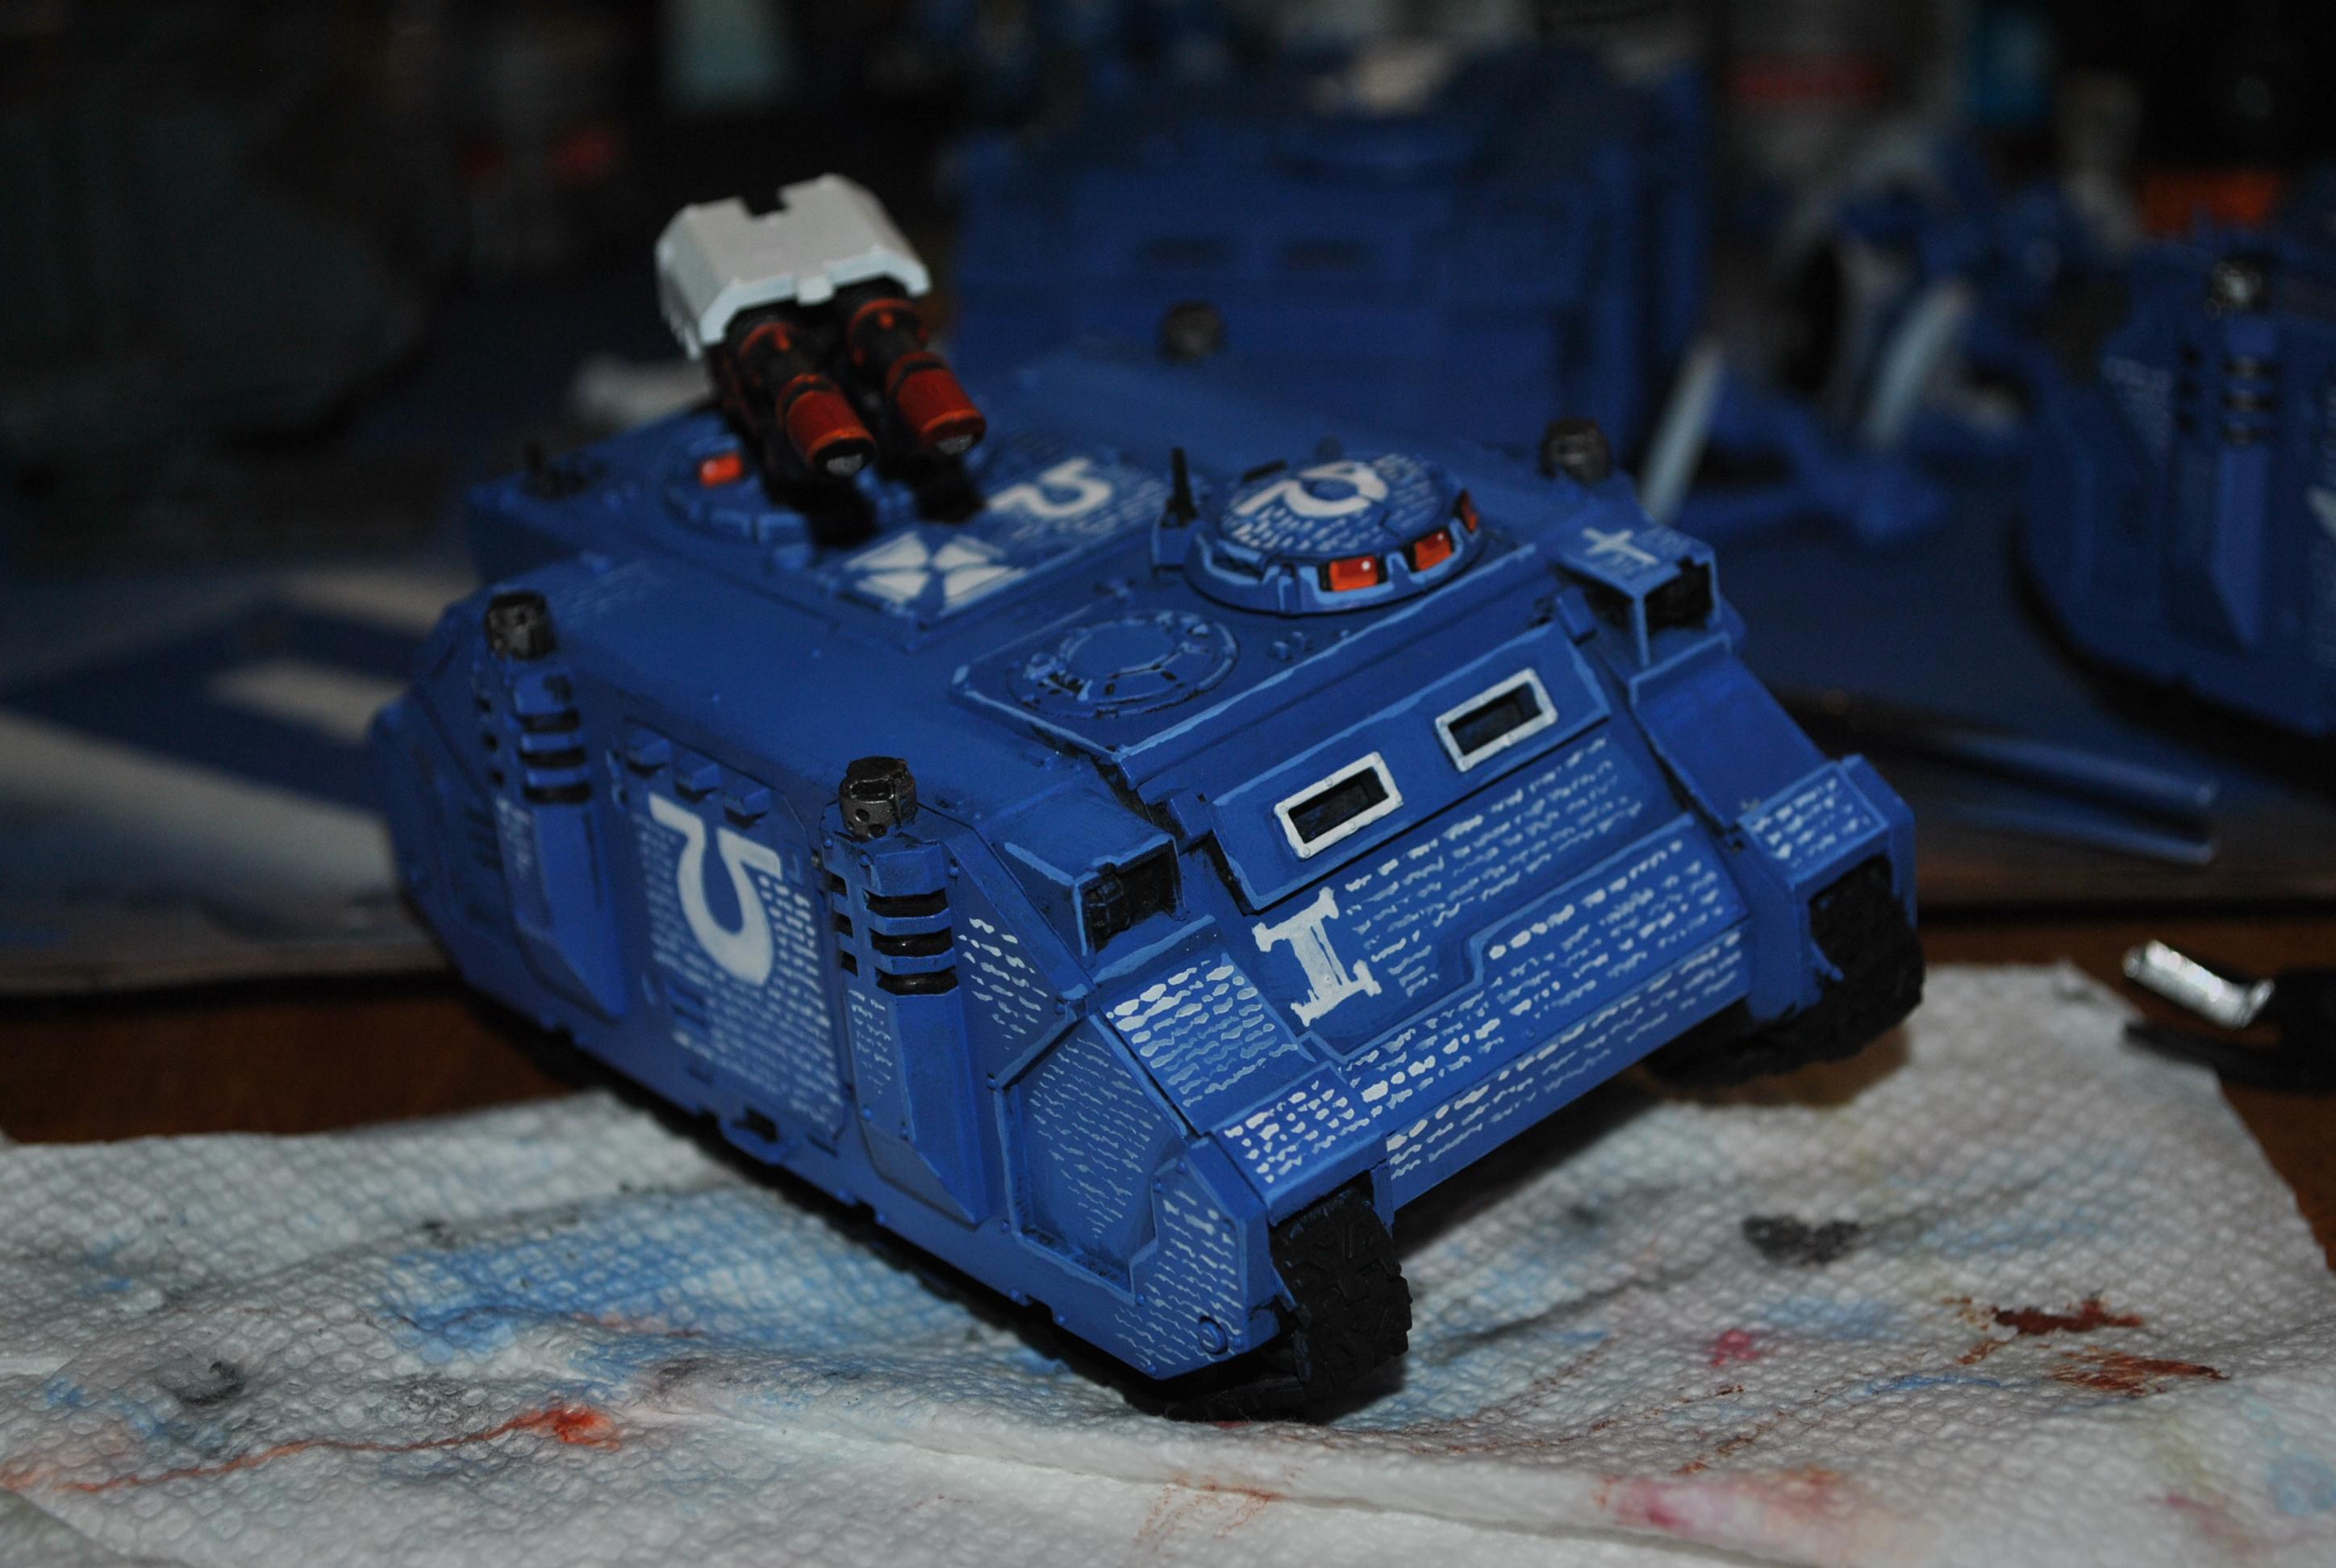 partially completed tw las razorback. cant decide what to do with it next